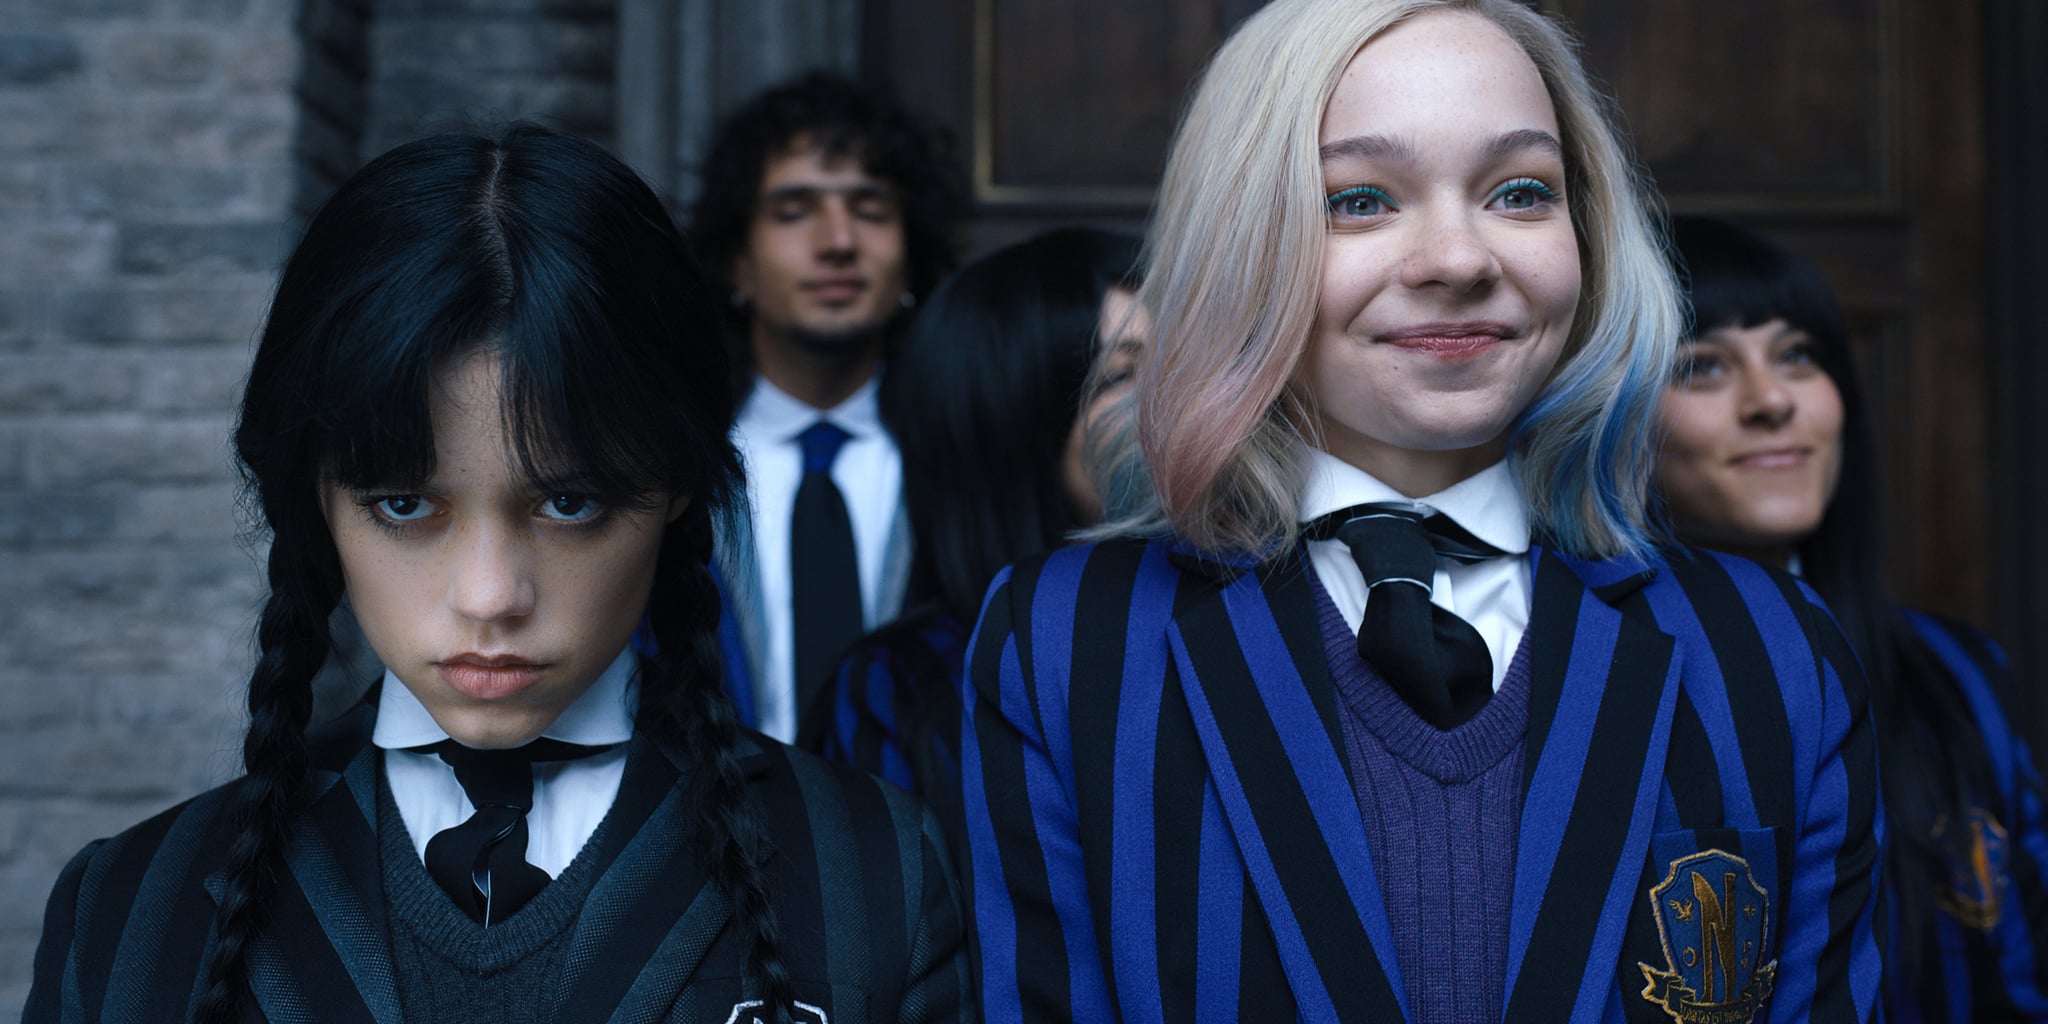 Wednesday.  (L-R) Jenna Ortega as Wednesday Addams, Emma Myers as Enid Sinclair in episode 102 of Wednesday.  Ten million.  Courtesy of Netflix 2022